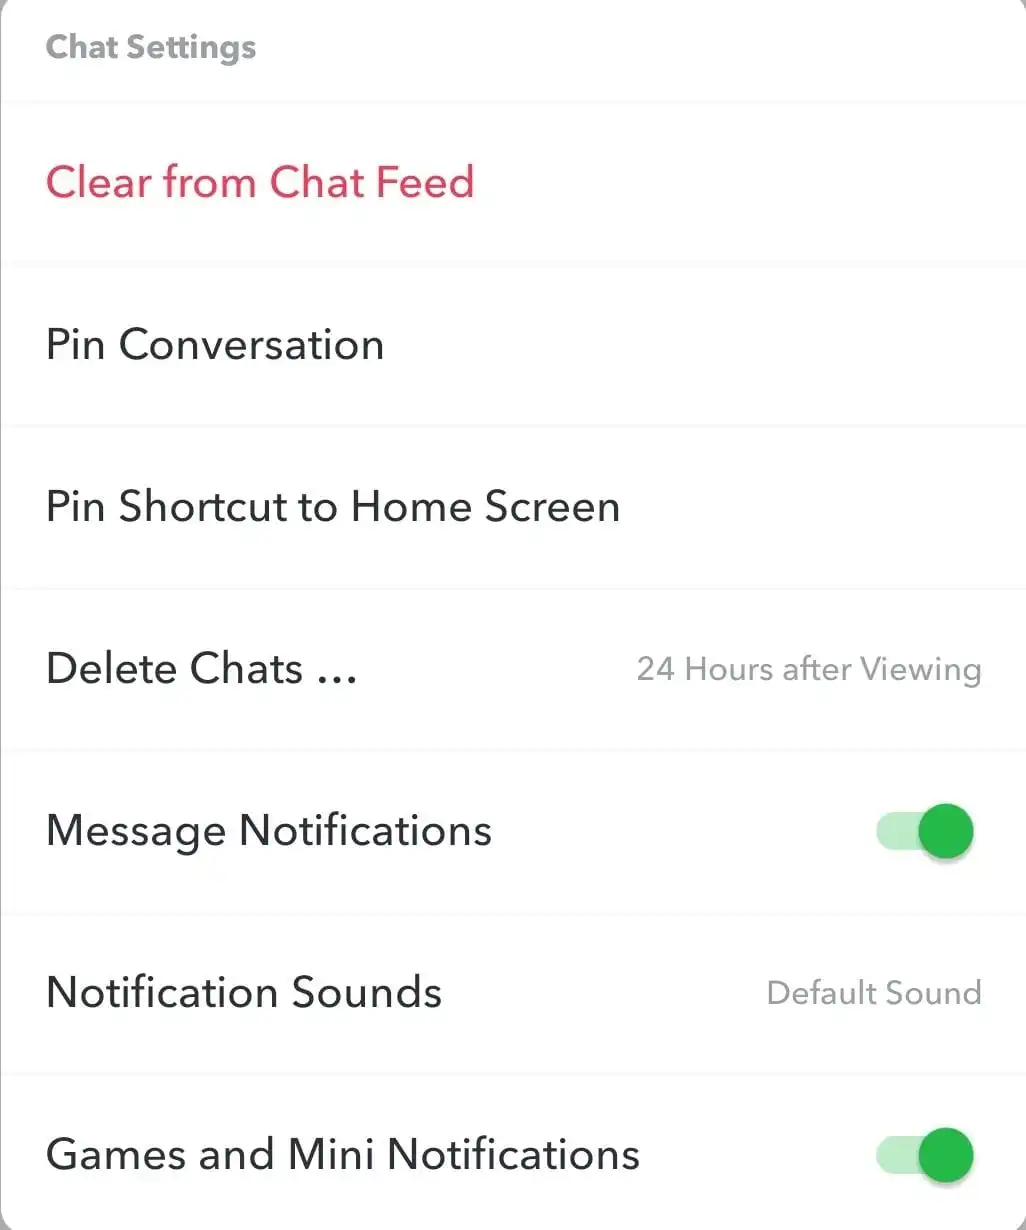 Clear from chat feed option on Snapchat